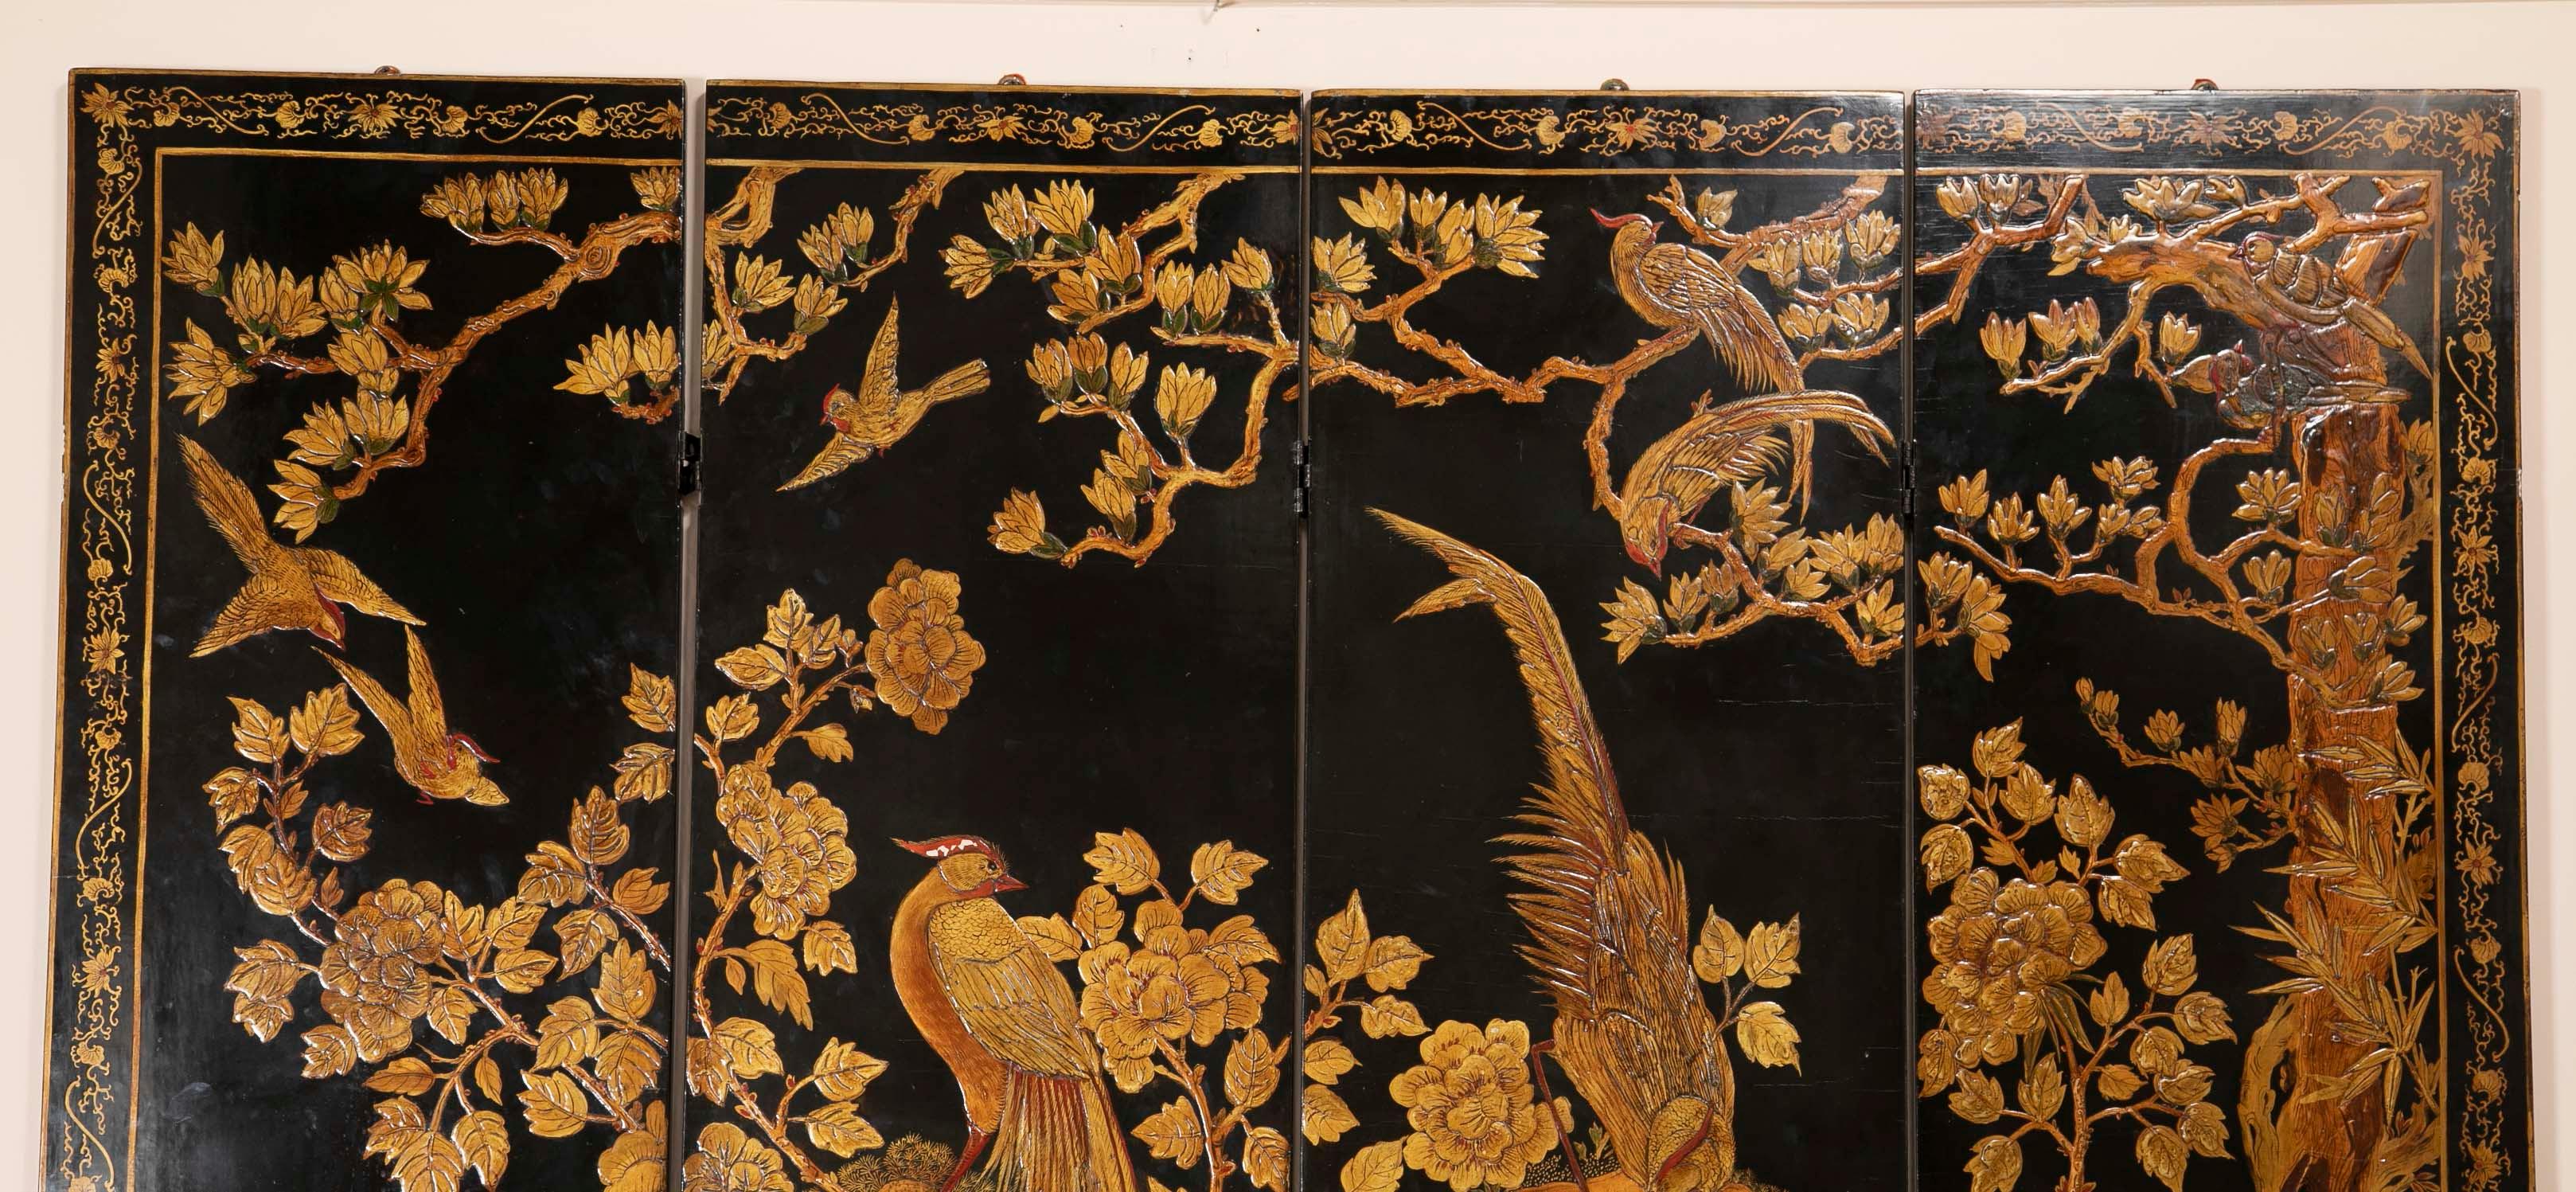 A Coromandel Chinese screen depicting a Phoenix in a wooded scene. Late 19th century.